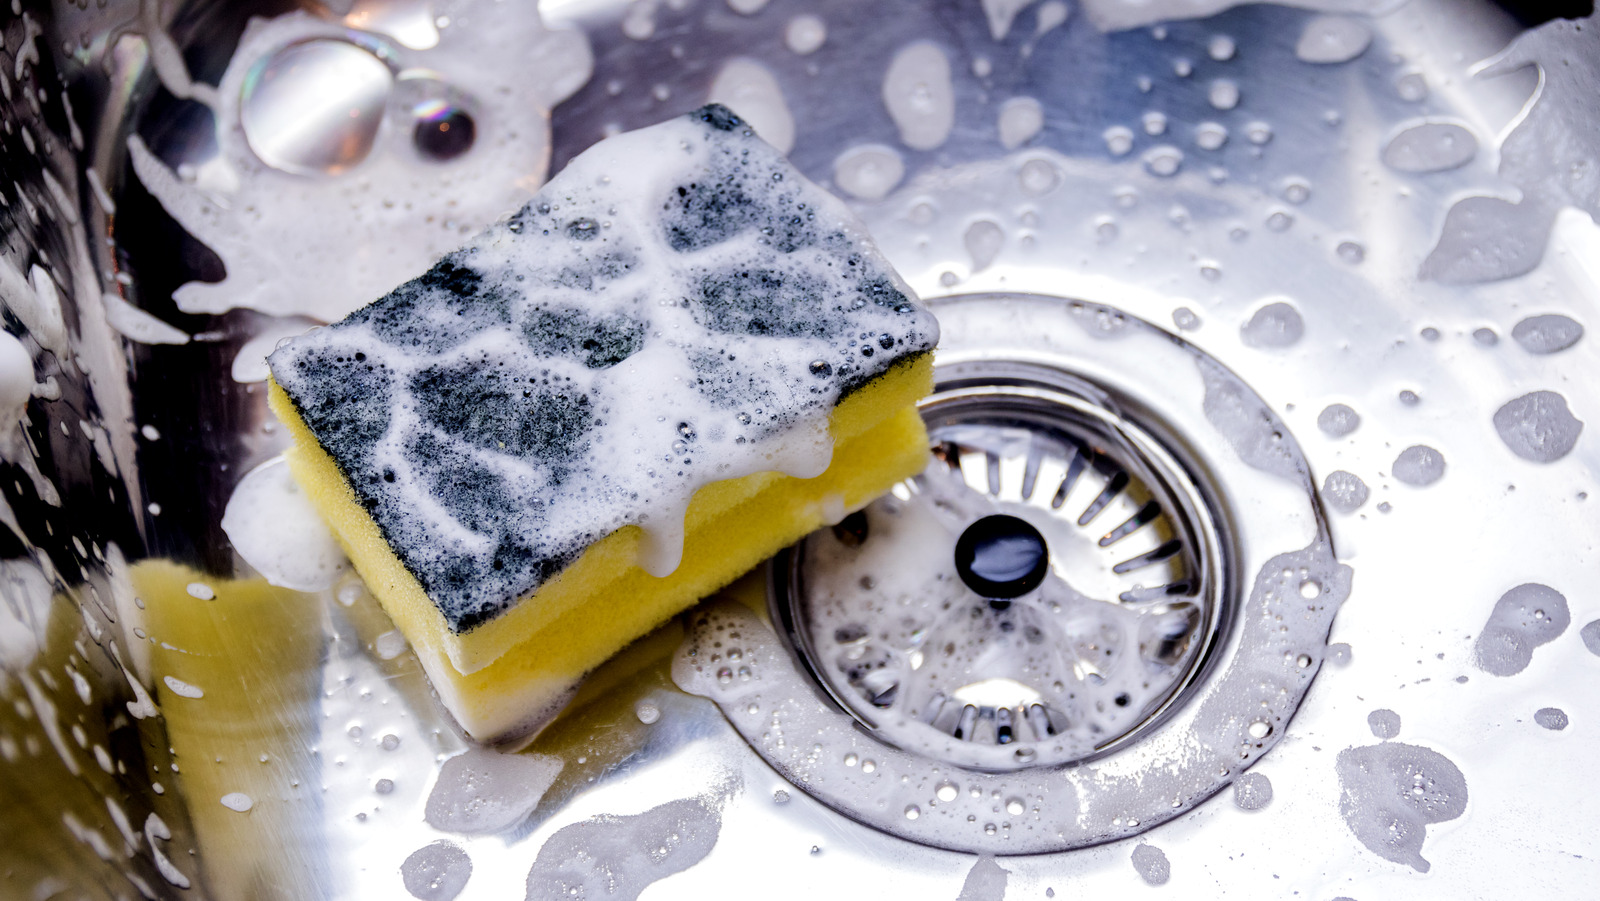 Why a dish sponge may hinder your cleaning: study